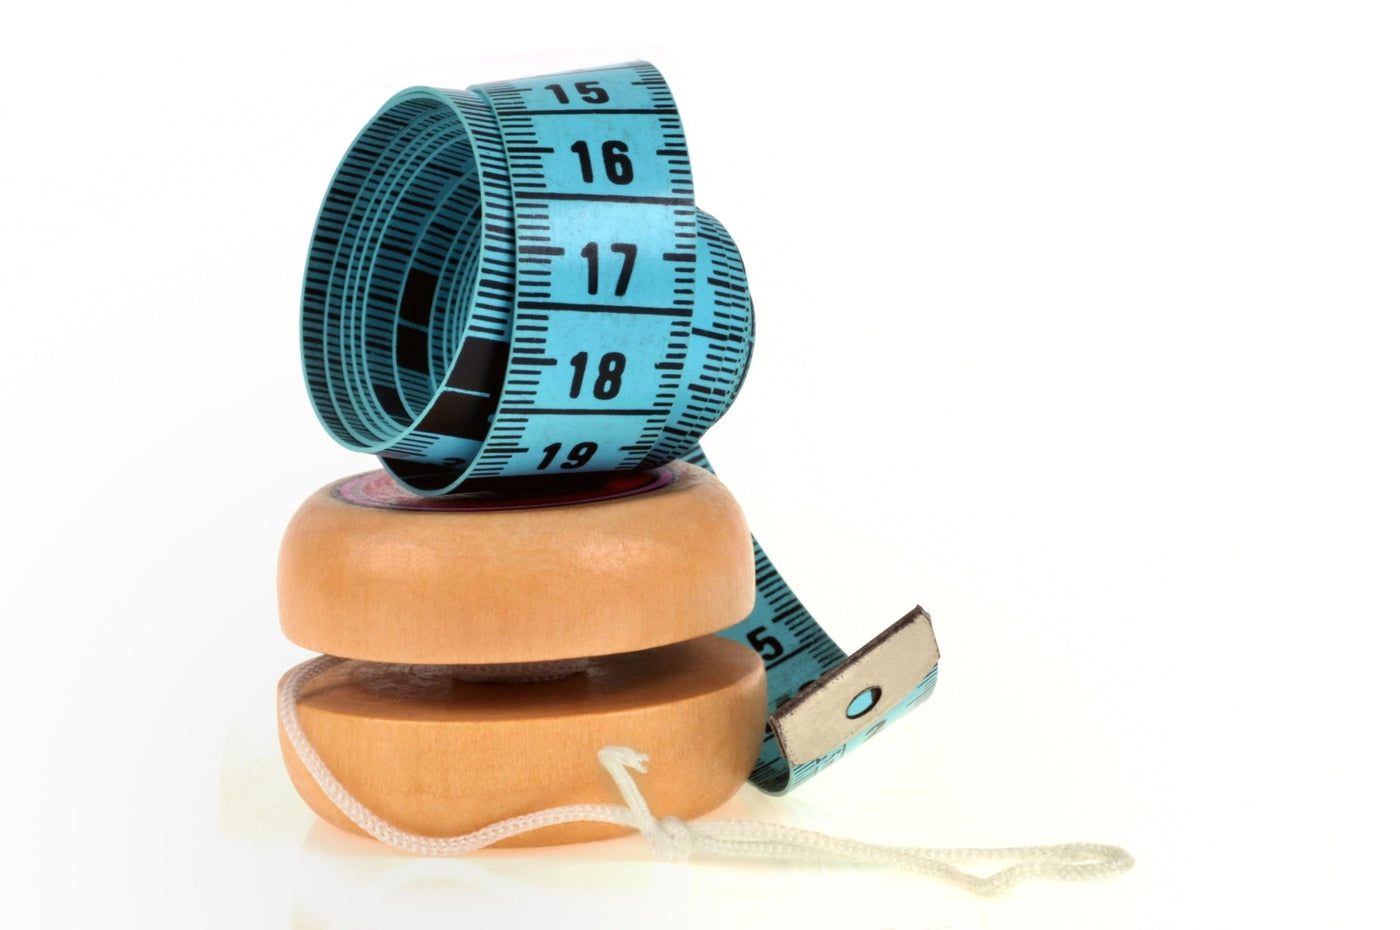 YO-YO DIETING HARMS OUR GUT BACTERIA - The Weightloss Doctor